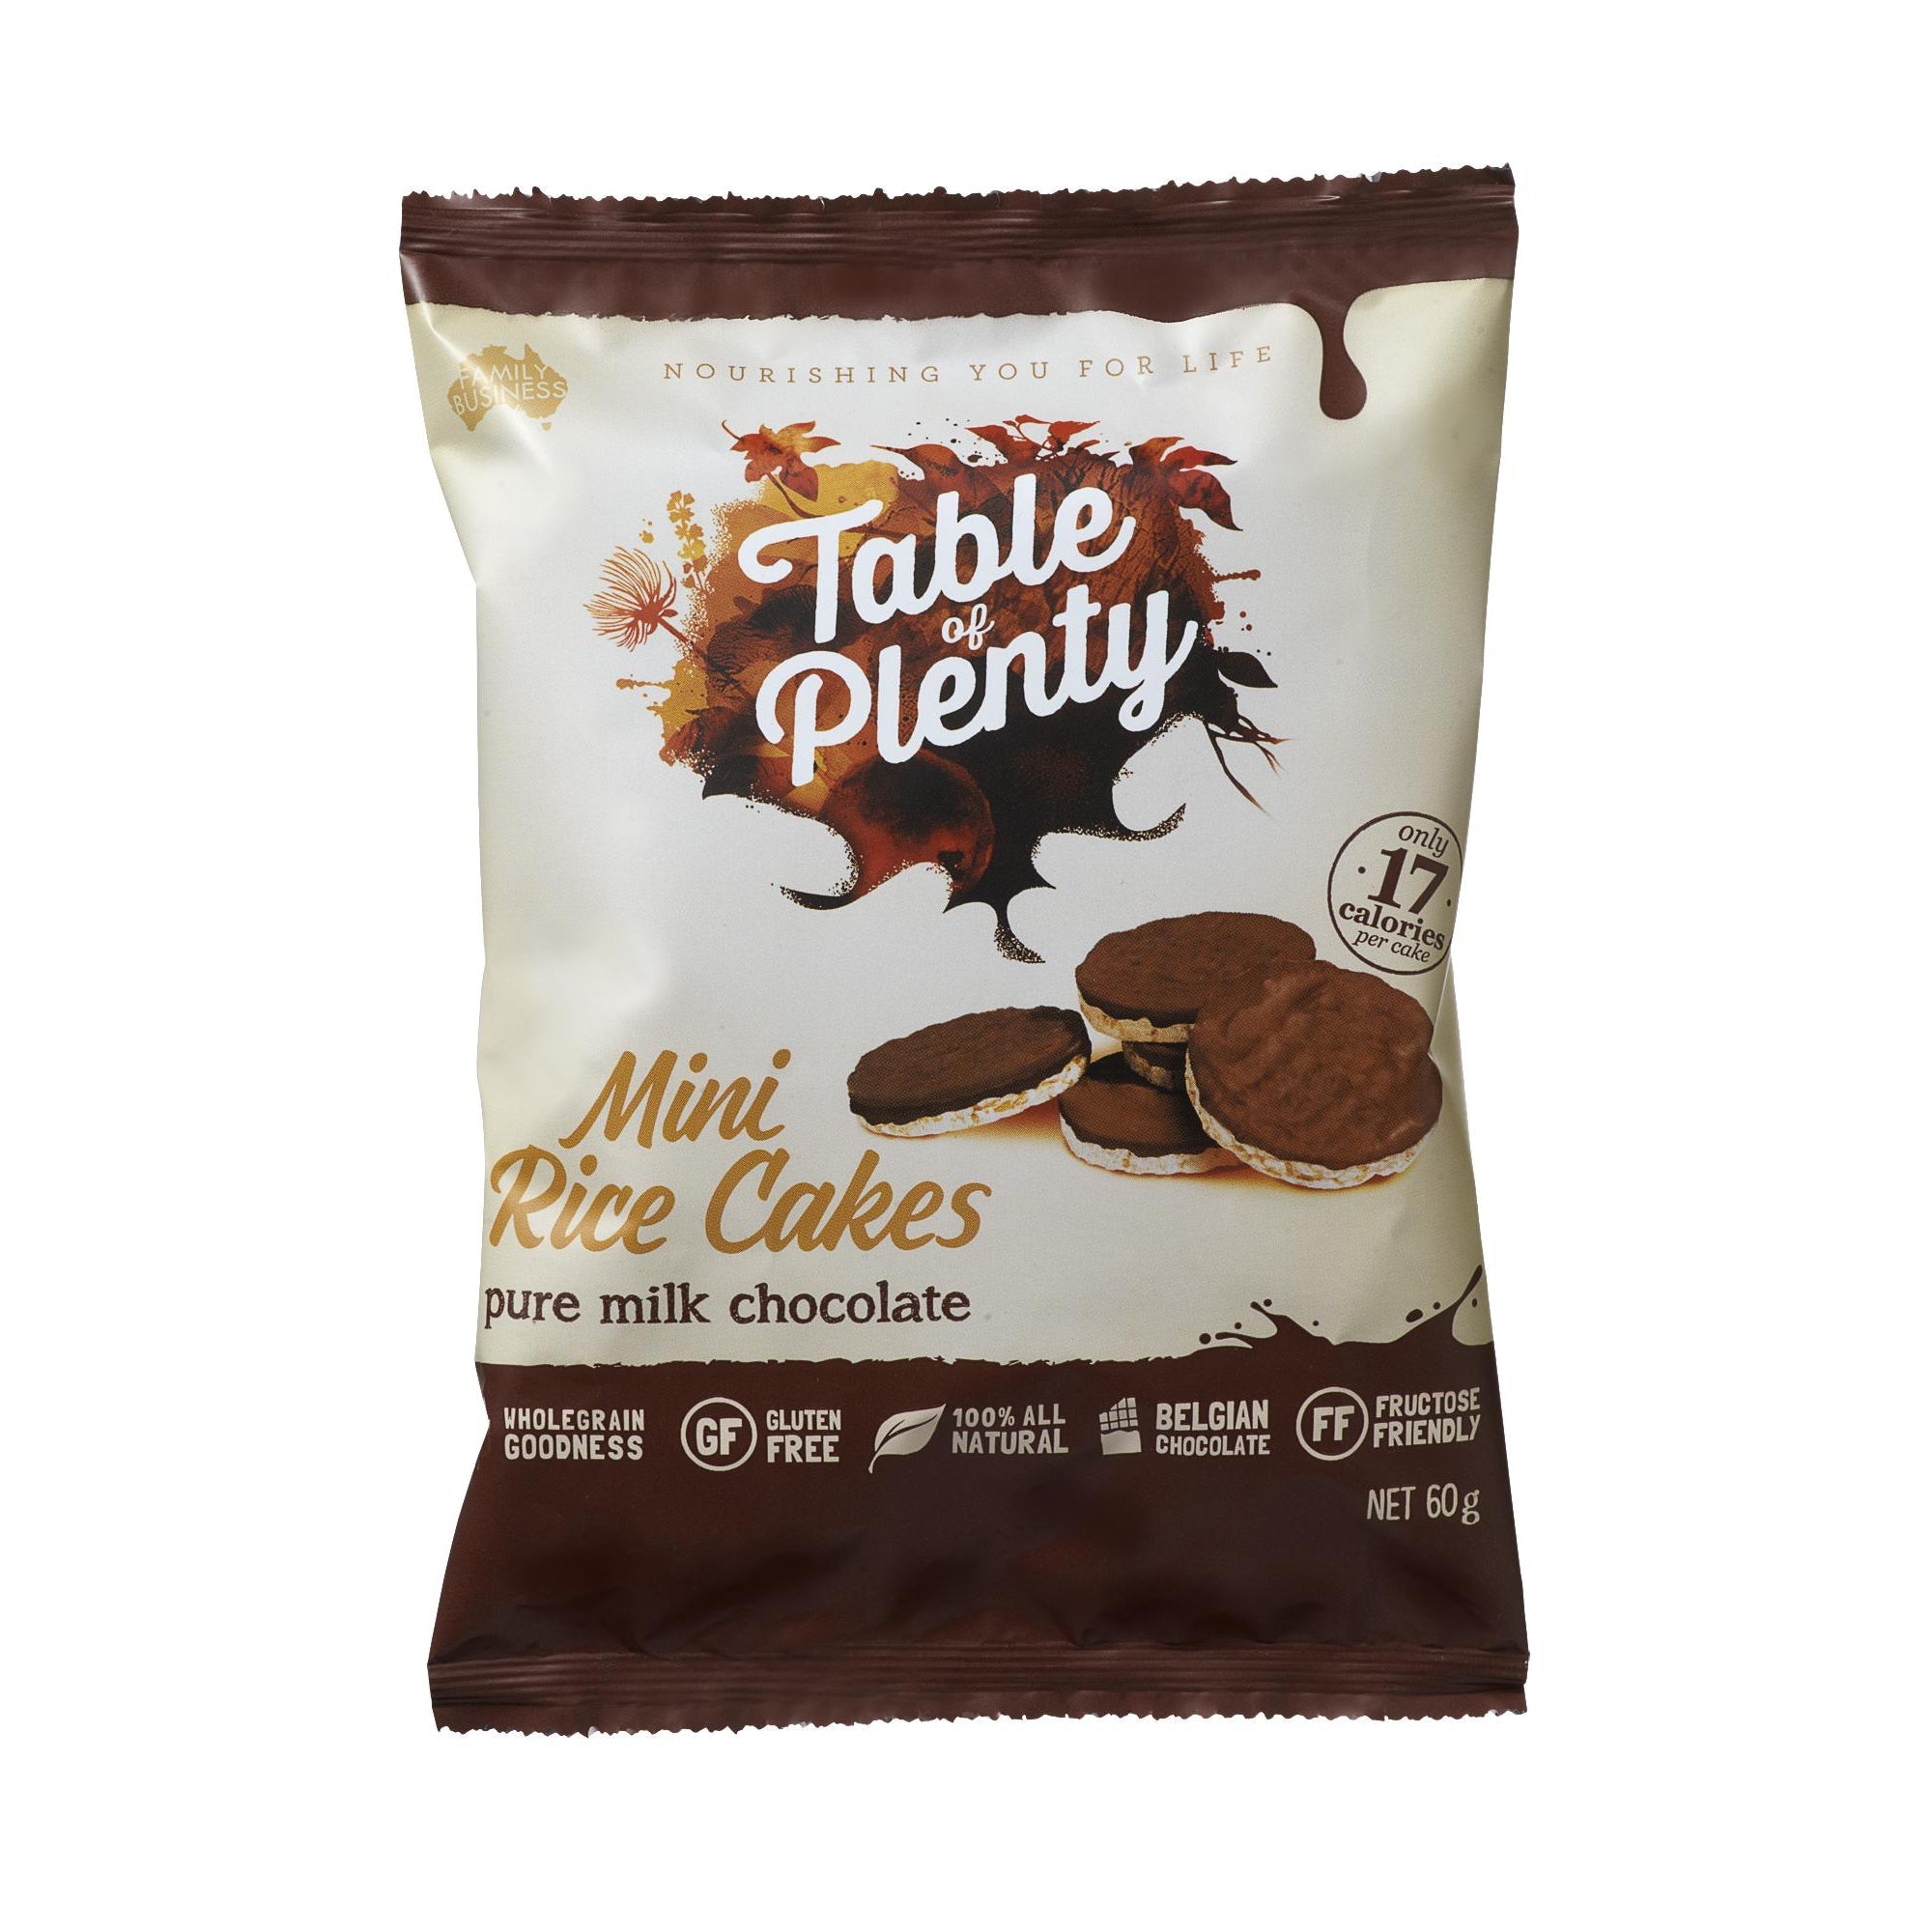 Plain Rice Cakes 100 g | Woolworths.co.za